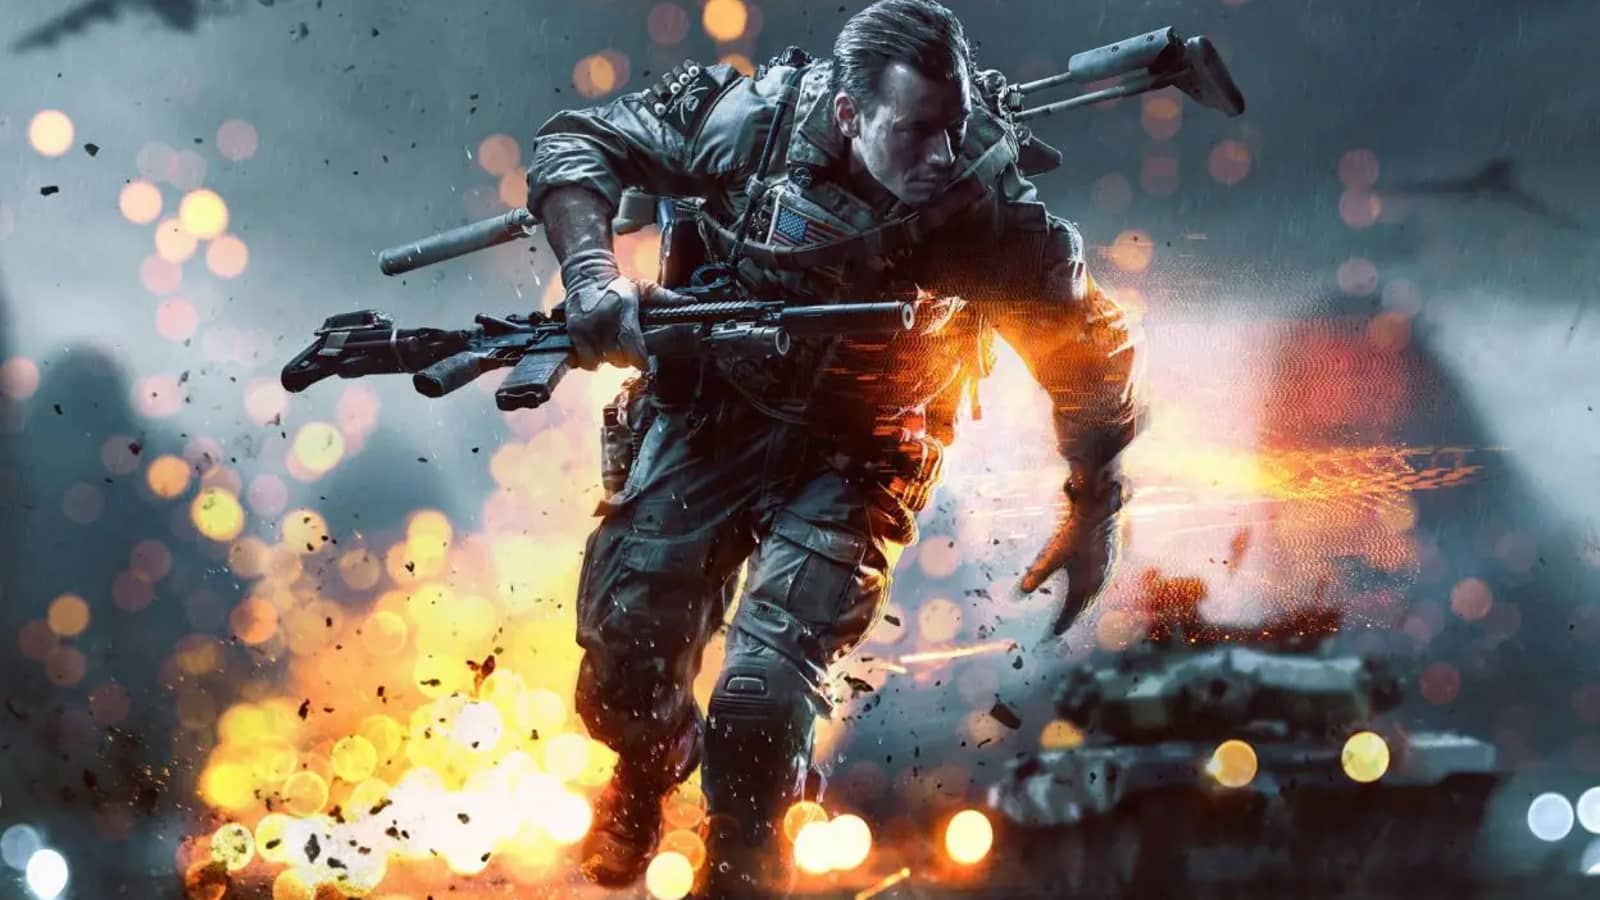 Does anyone still play Battlefield 4 in India? If yes, then how